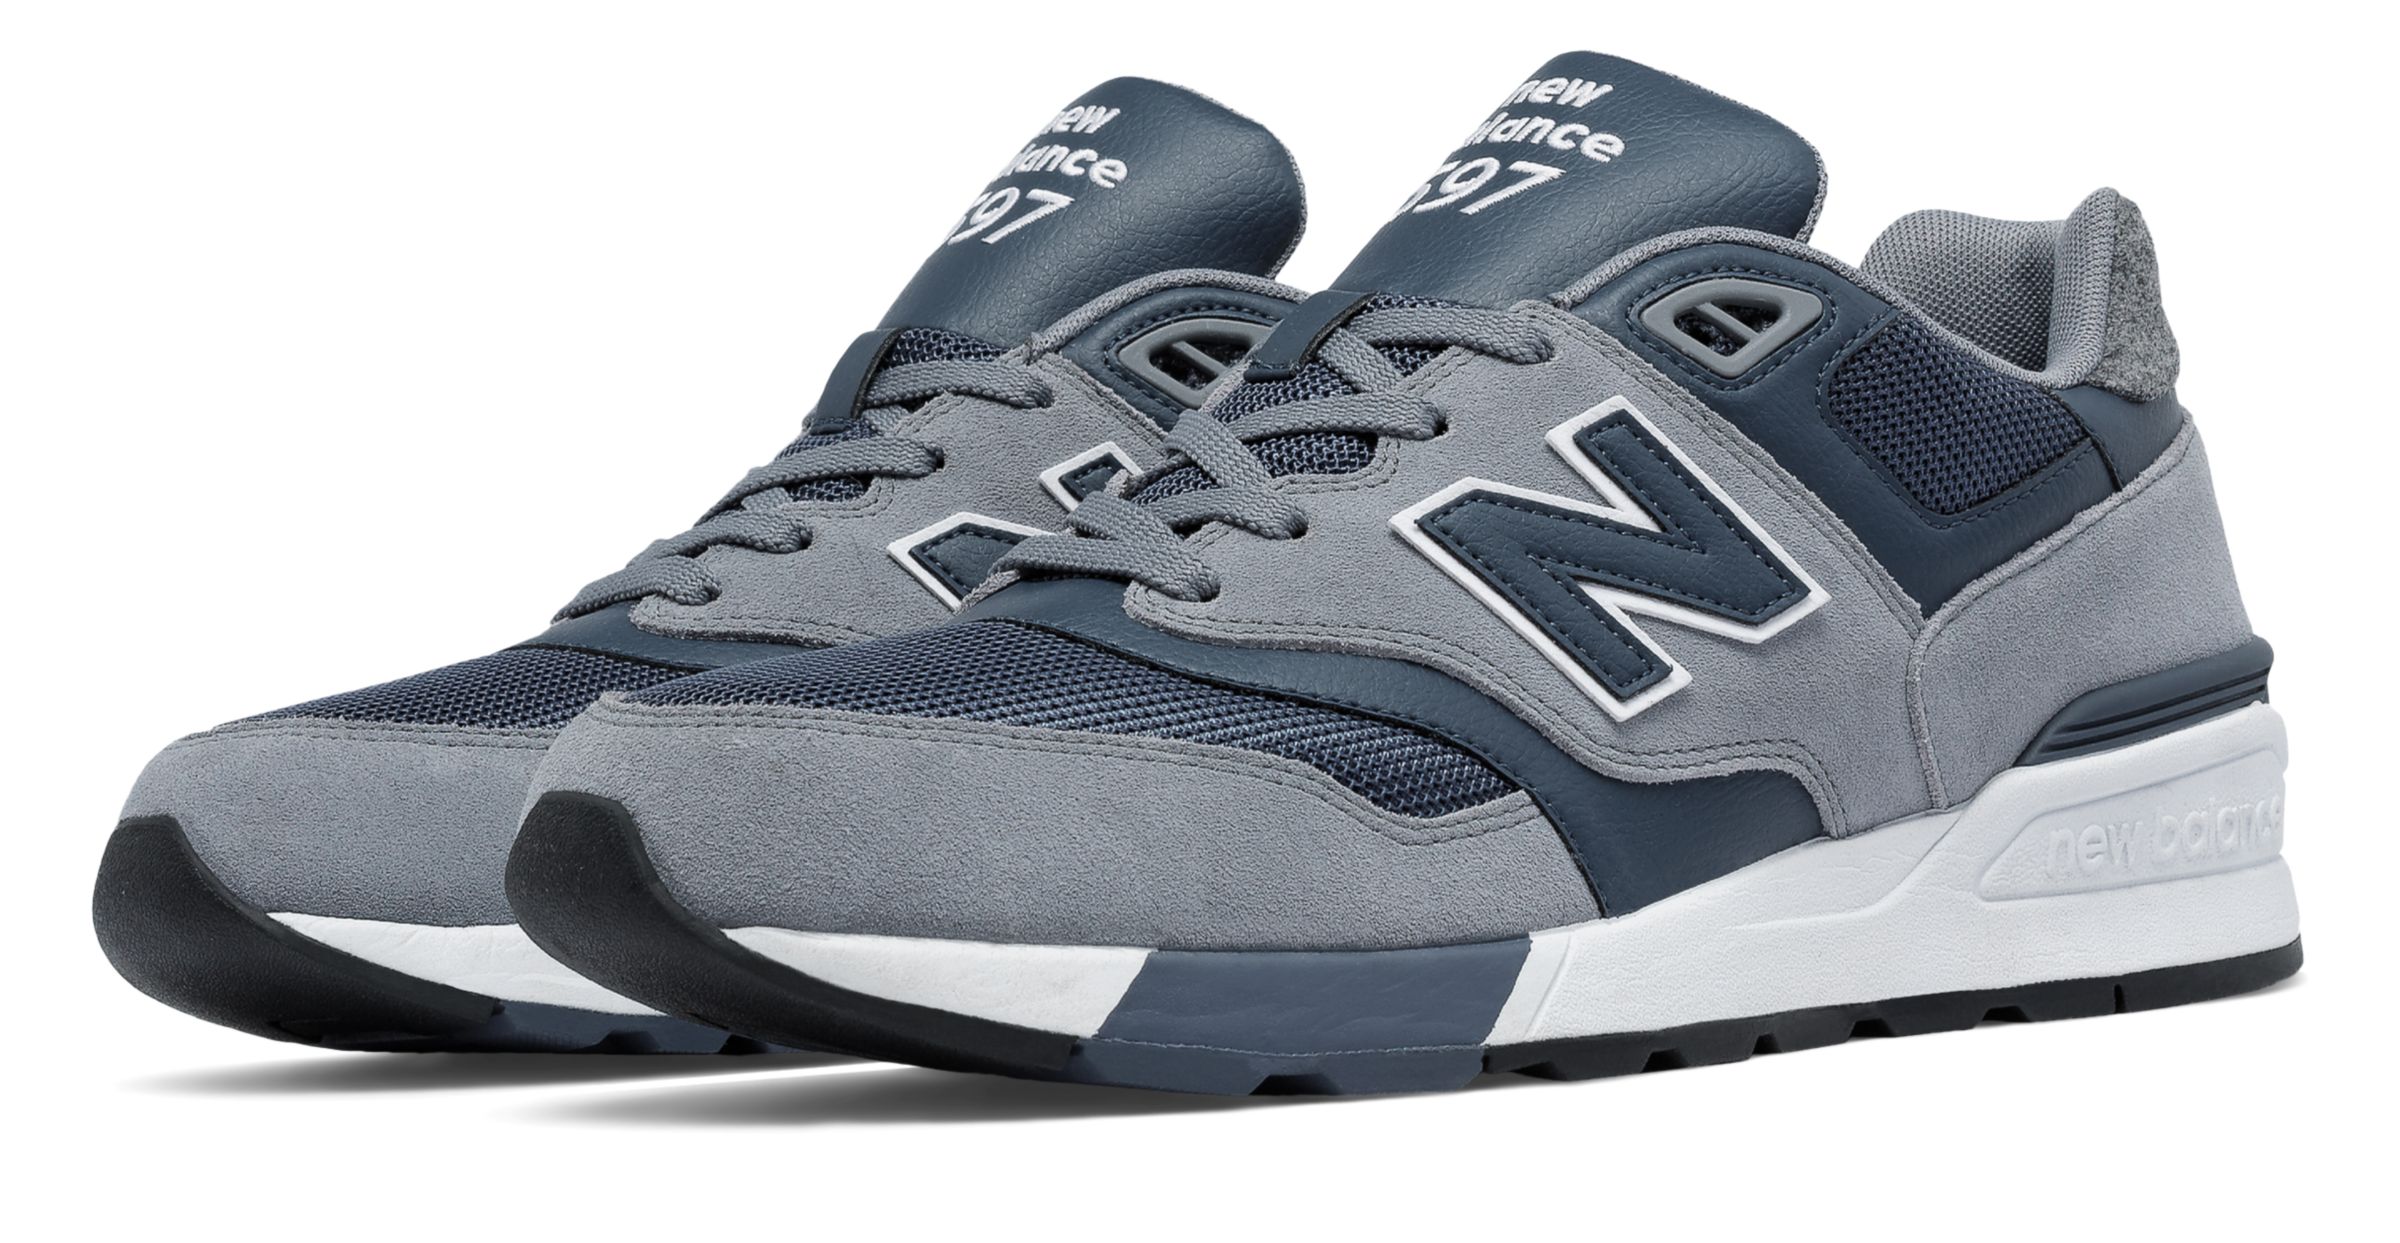 New Balance ML597 on Sale - Discounts Up to 32% Off on ML597NEB at Joe's  New Balance Outlet